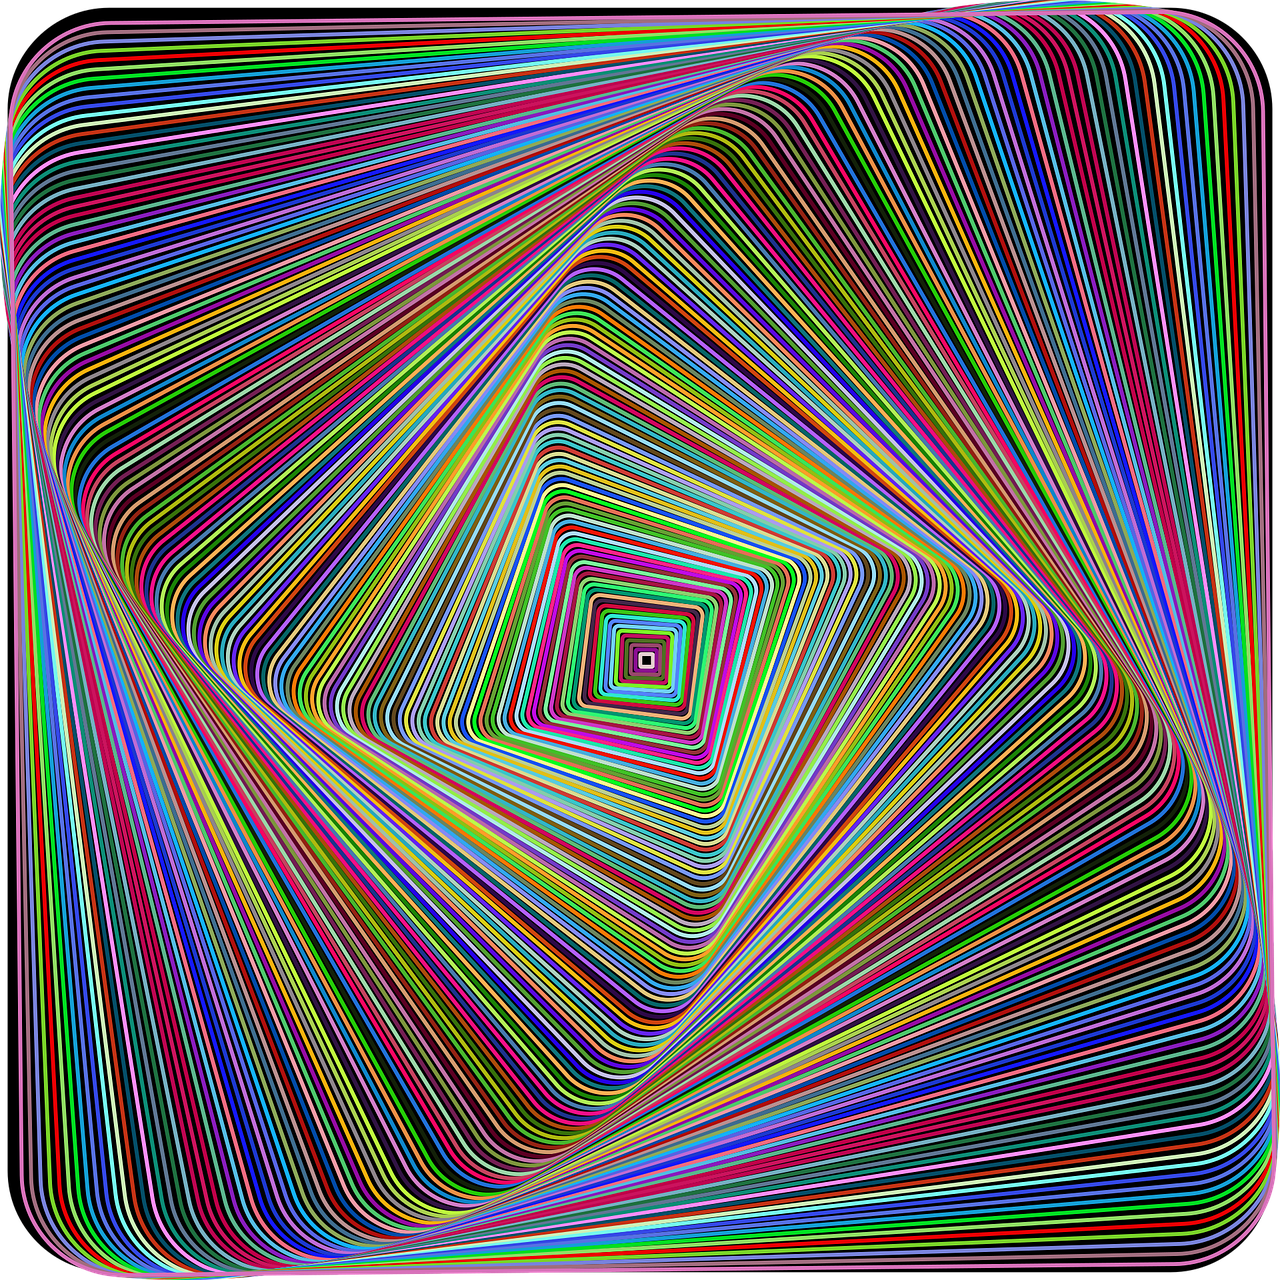 a computer generated image of a multicolored square, a raytraced image, inspired by Richard Anuszkiewicz, abstract illusionism, !!! very coherent!!! vector art, swirling, neon lines, modern - art - vector